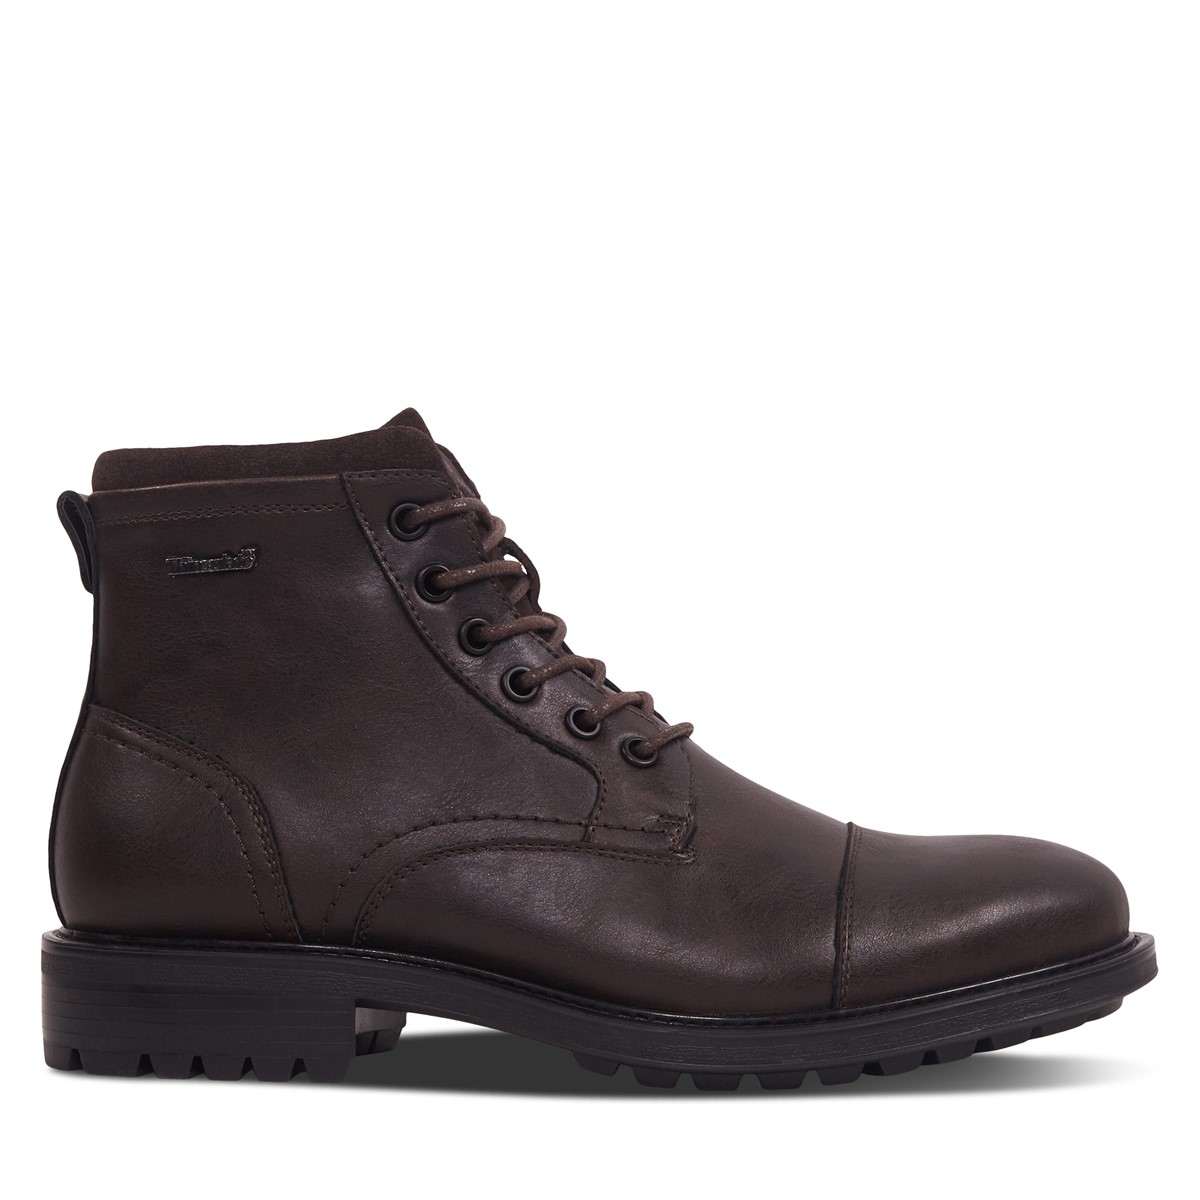 Men's Oliver Lace-up Boots in Dark Brown